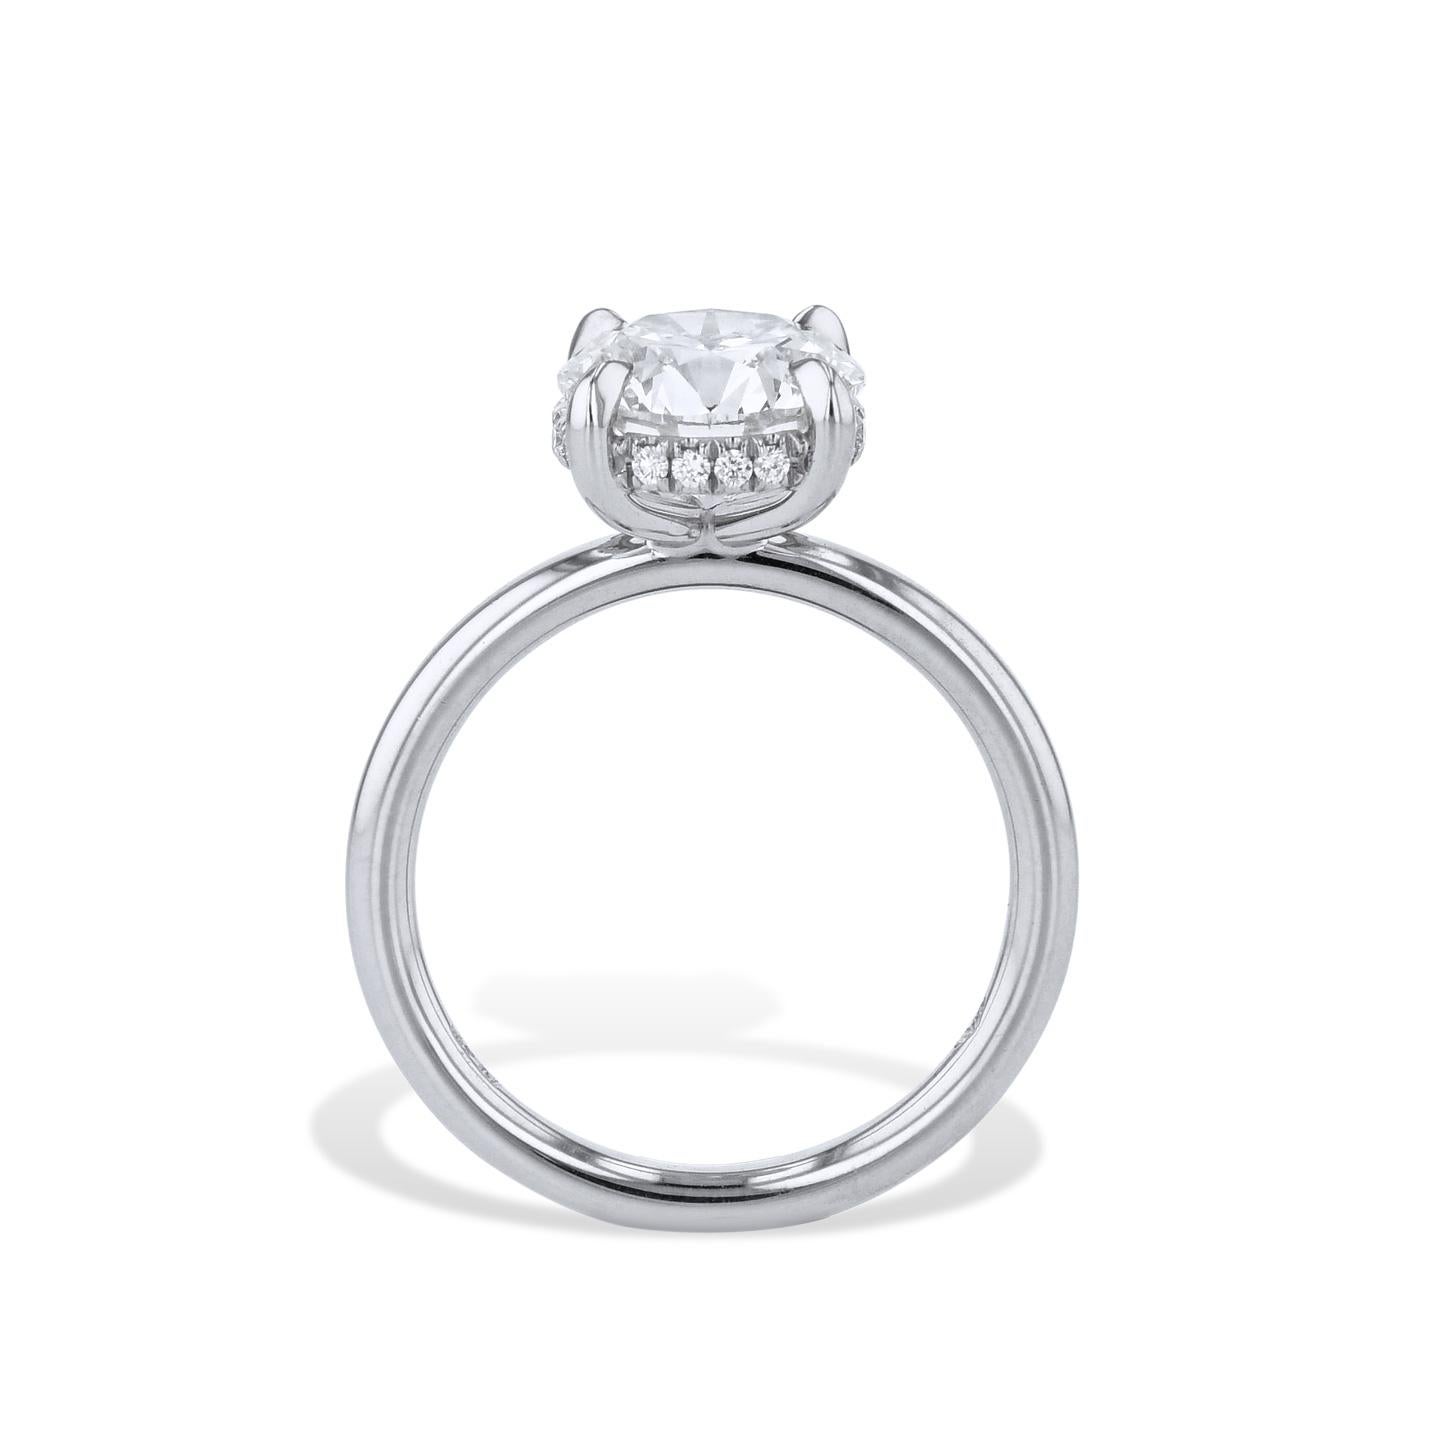 This Round Diamond Platinum Engagement Ring is a masterpiece of craftsmanship, featuring an exquisite Round Brilliant Cut diamond set in the center. 16 glittering diamonds are pave-set under the basket, forming an eye-catching halo. Handmade by the